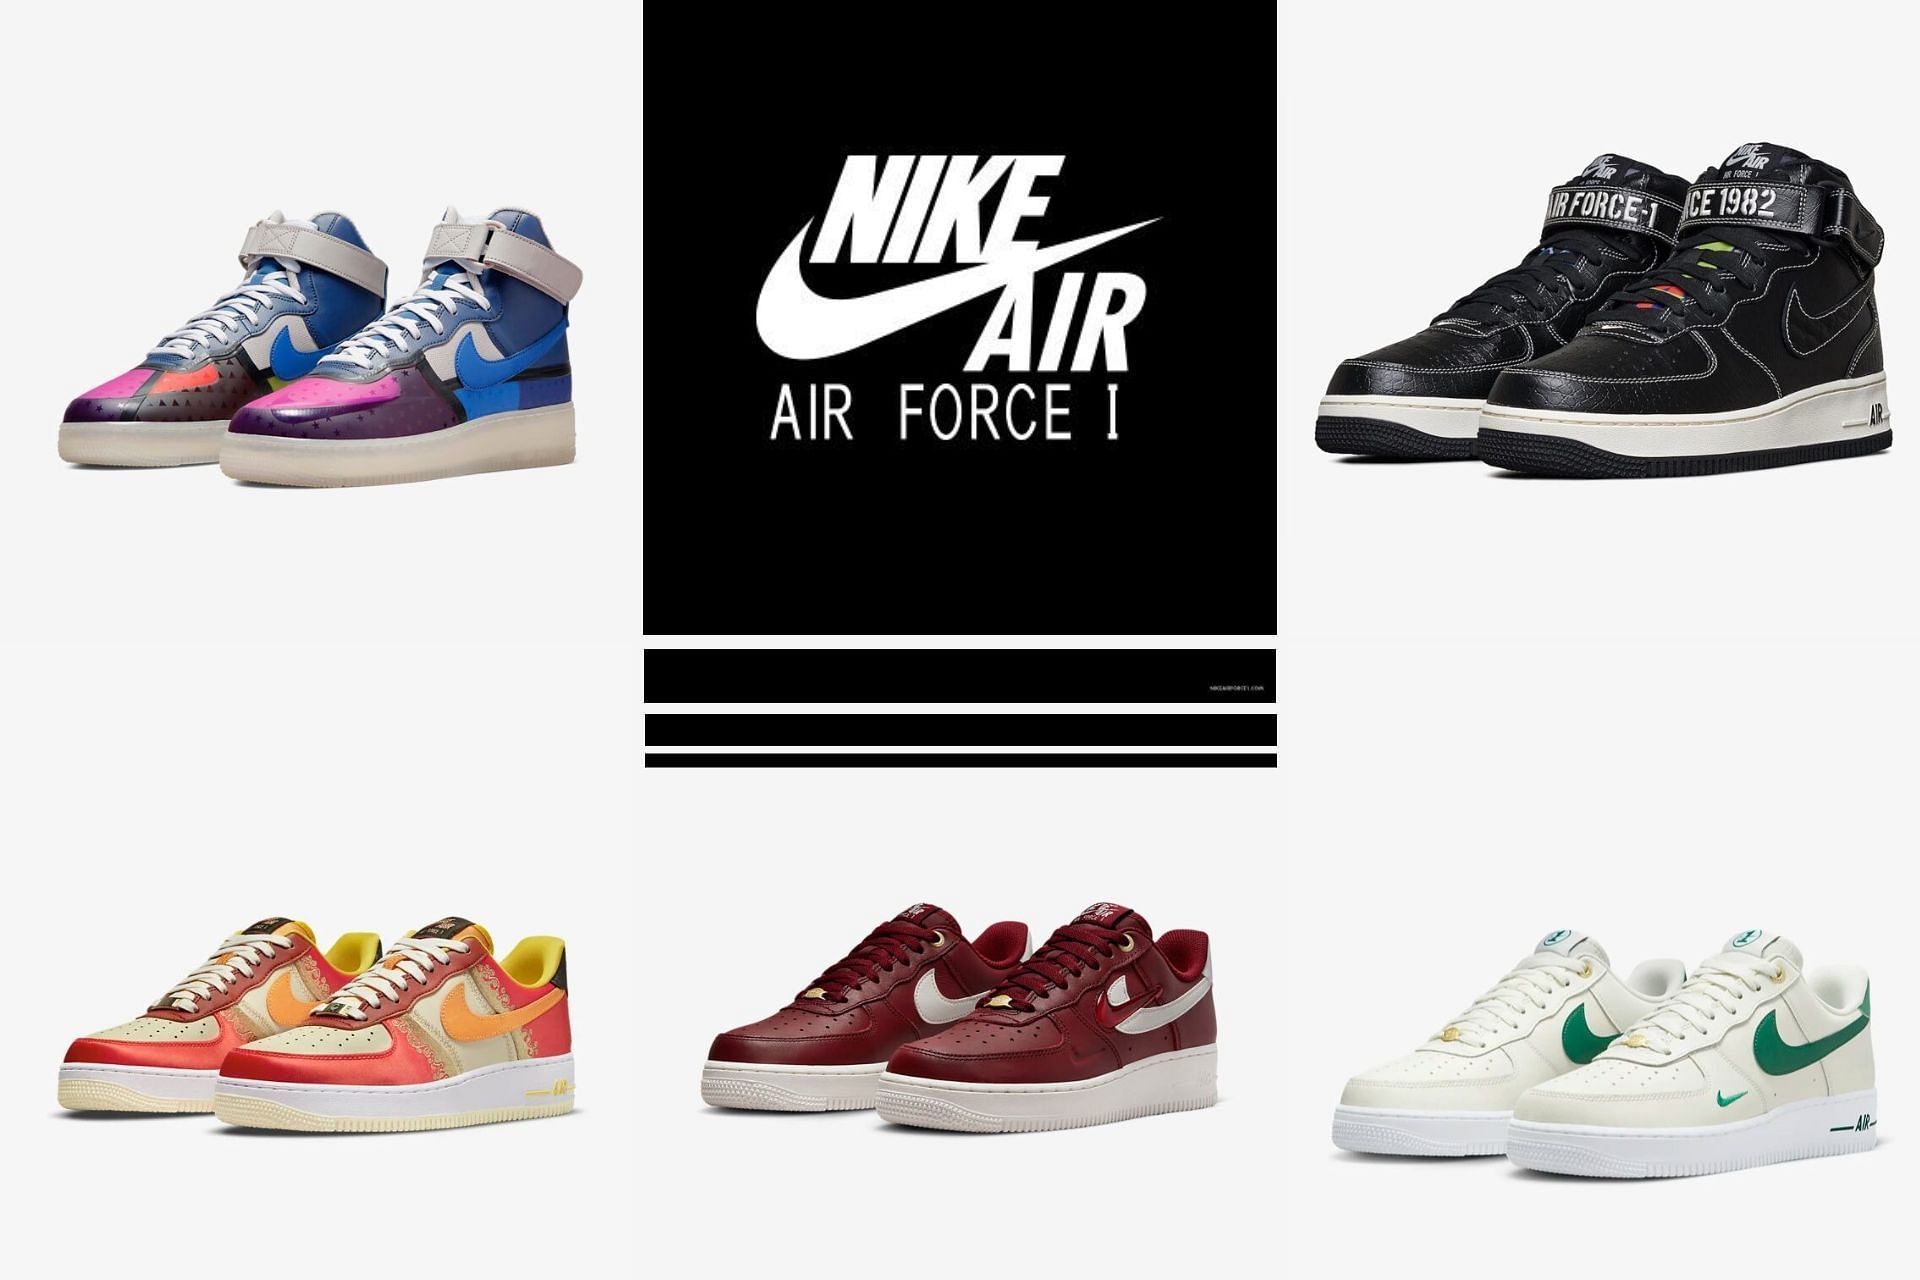 Nike: 5 best Air Force 1 colorways released for 40th anniversary of the sneaker model